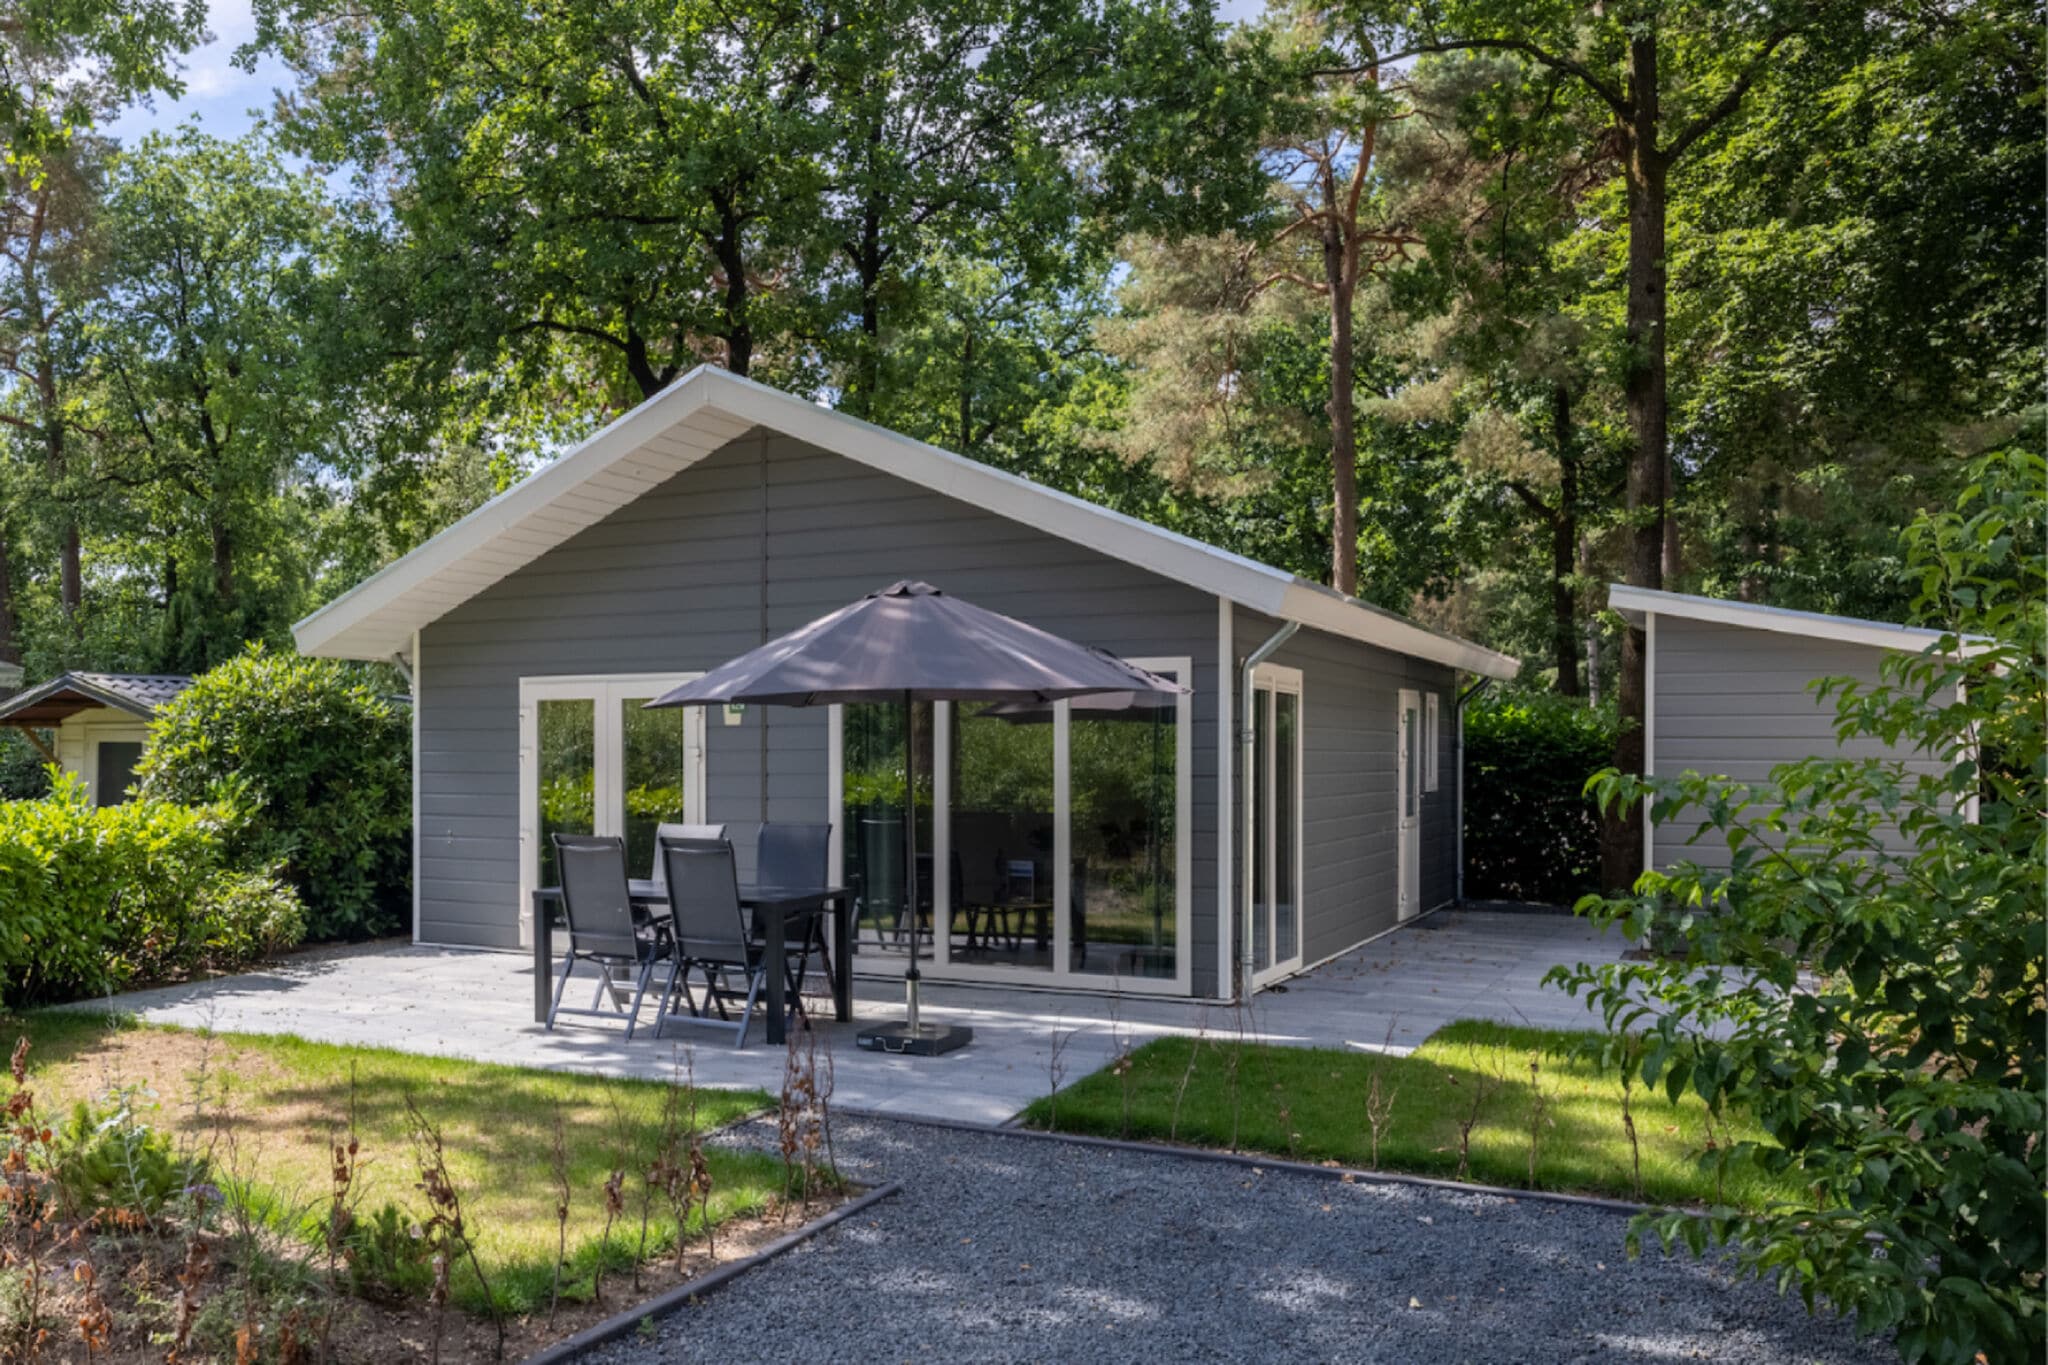 Nice chalet with a wooded location on the Veluwe